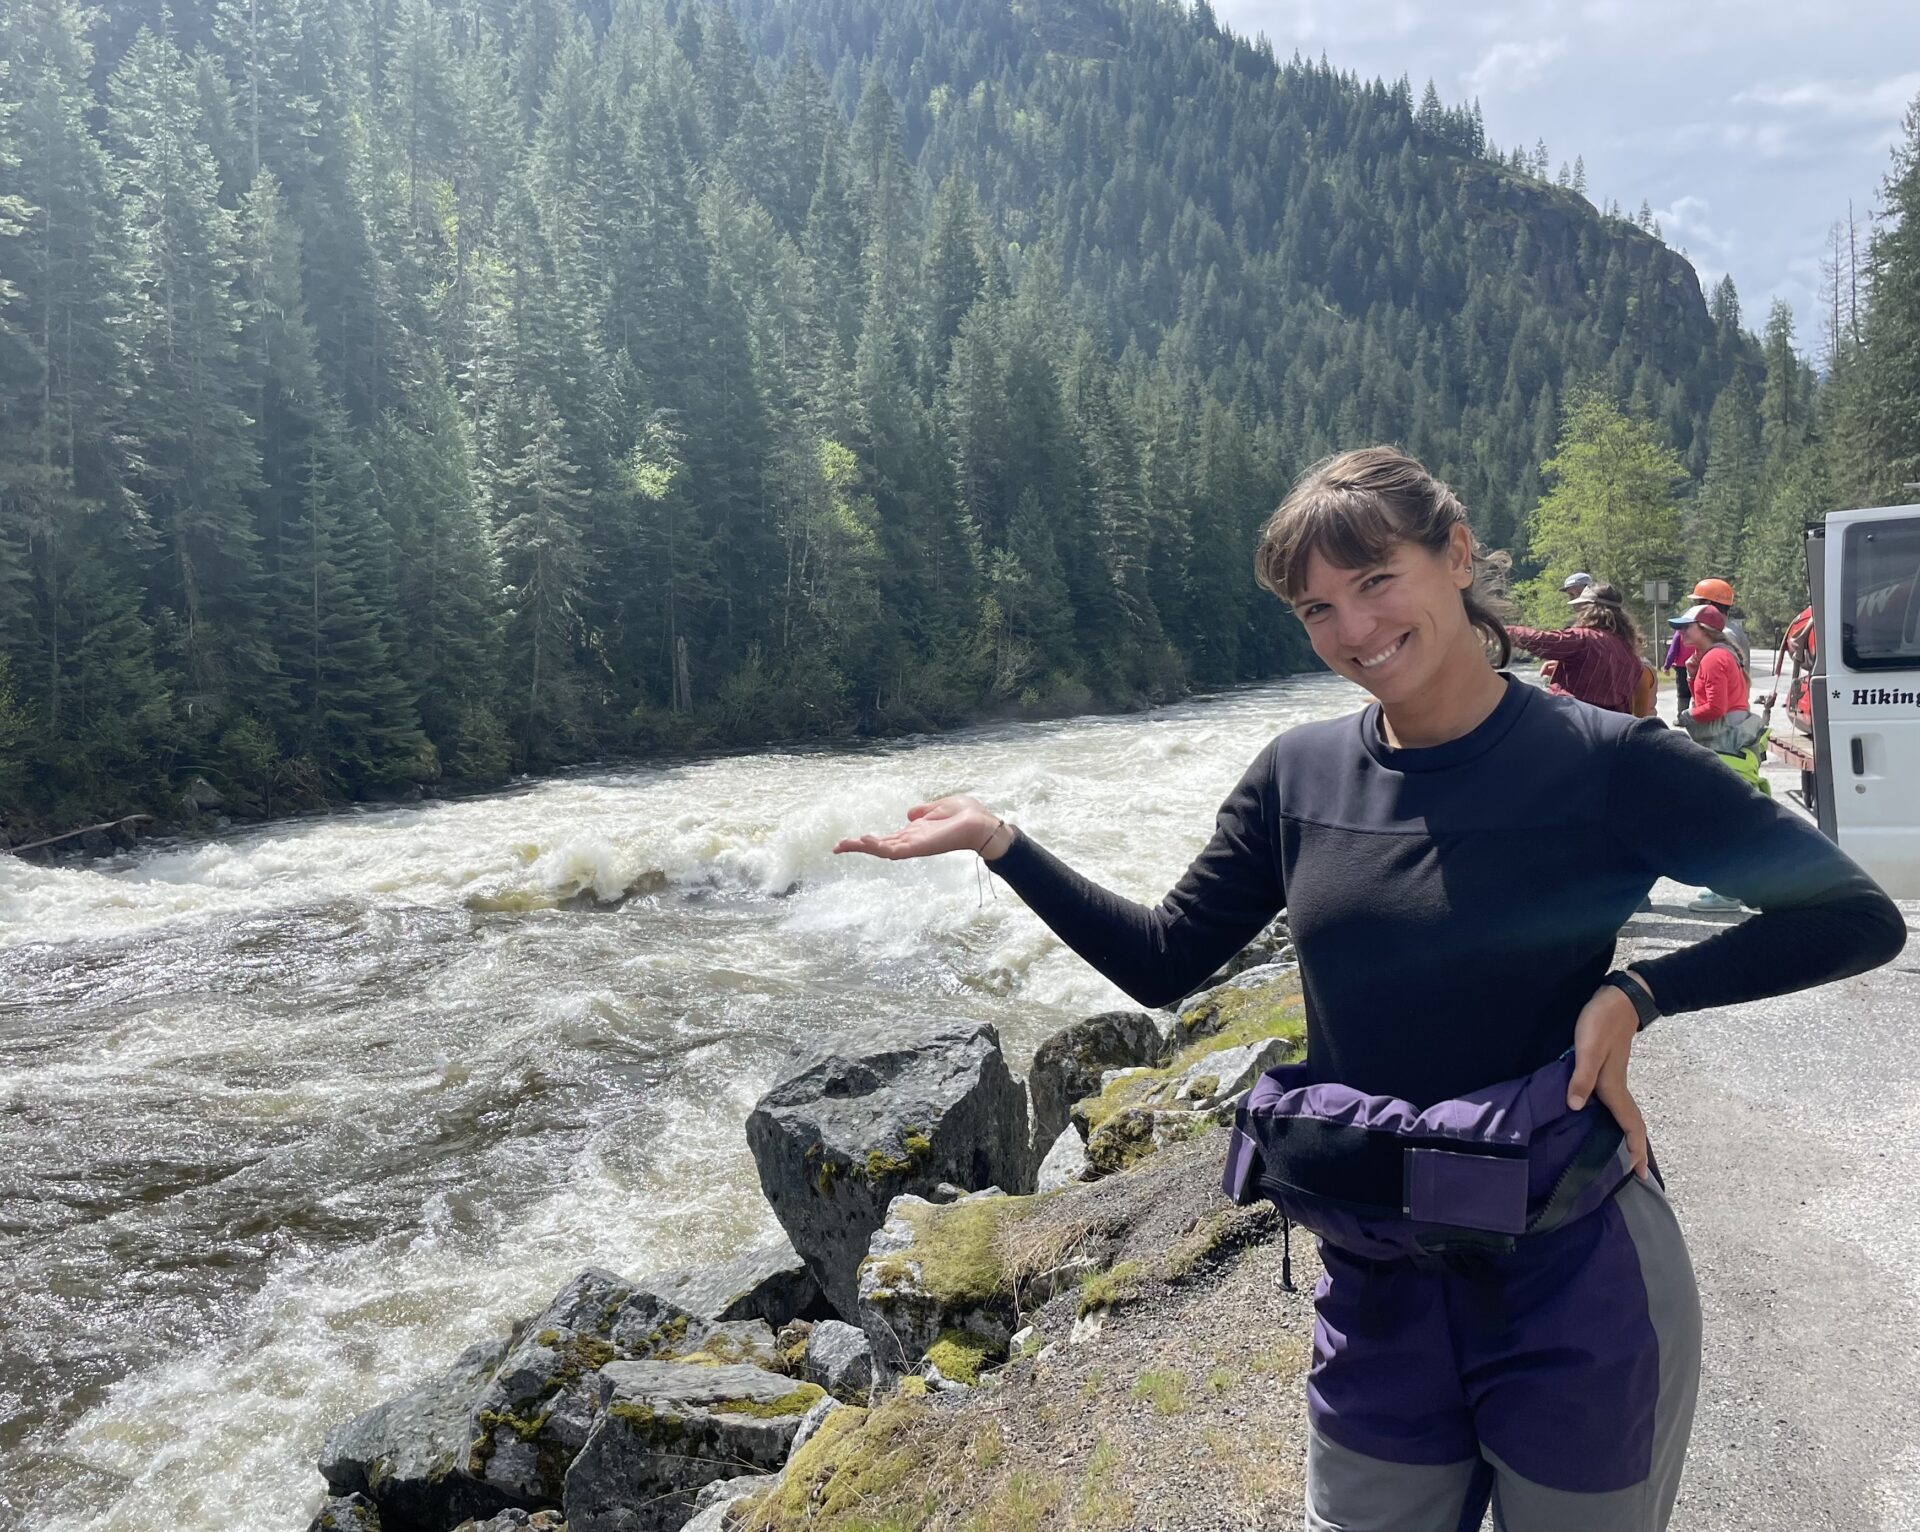 showing off the rapids of the lochsa river